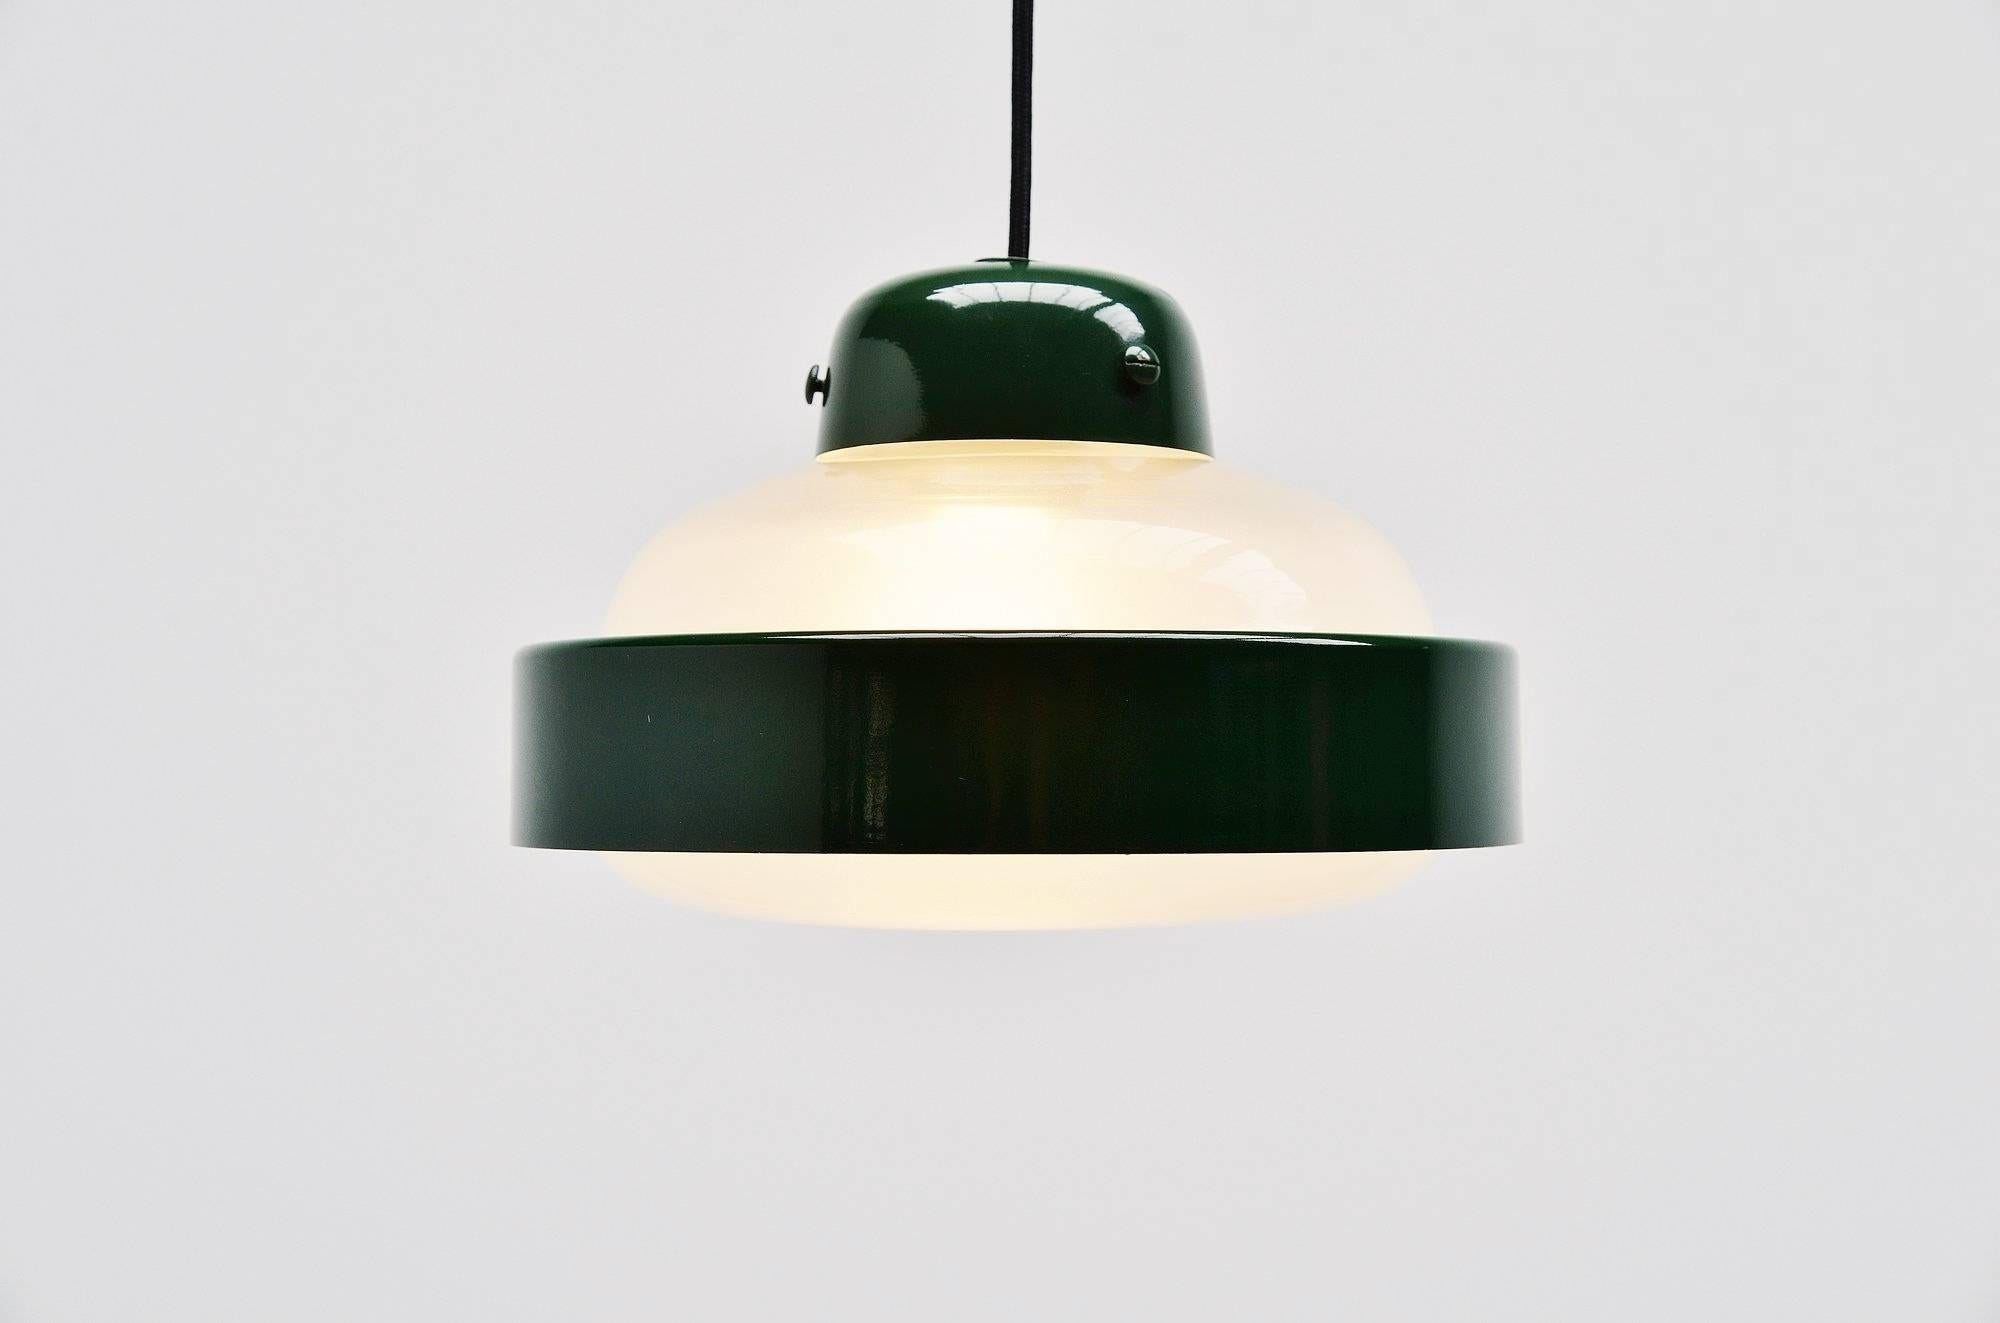 Rare pendant lamp model 2102p designed by Gino Sarfatti, manufactured by Arteluce, Italy, 1959. This light exists in three parts, a diffuser in opaline glass, reflective supporting ring in green lacquered aluminium, ceiling fitting lacquered green.